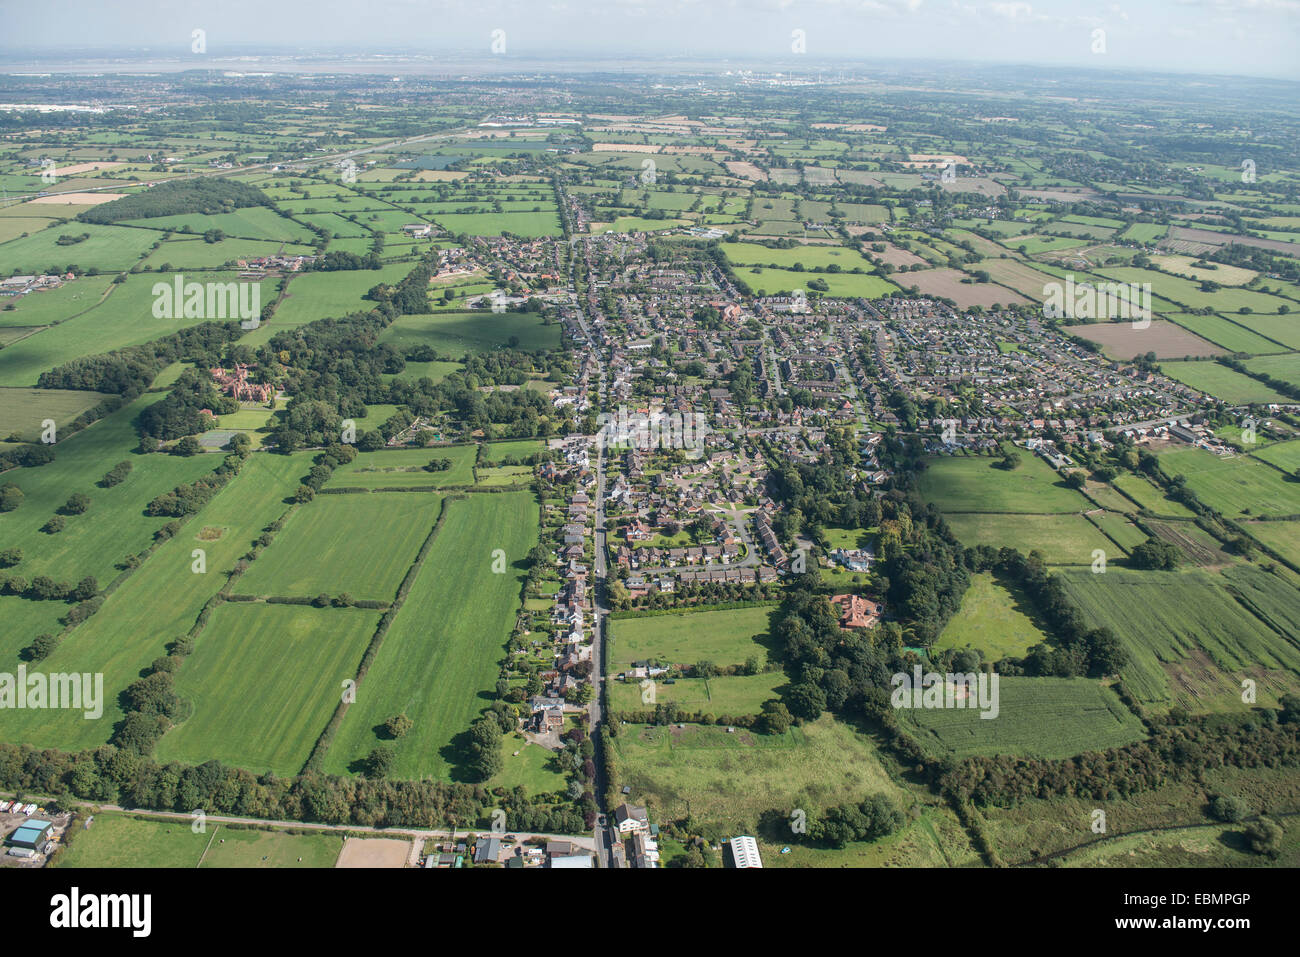 An aerial view of the Cheshire village of Saughall with surrounding countryside and Ellesmere Port visible in the distance Stock Photo